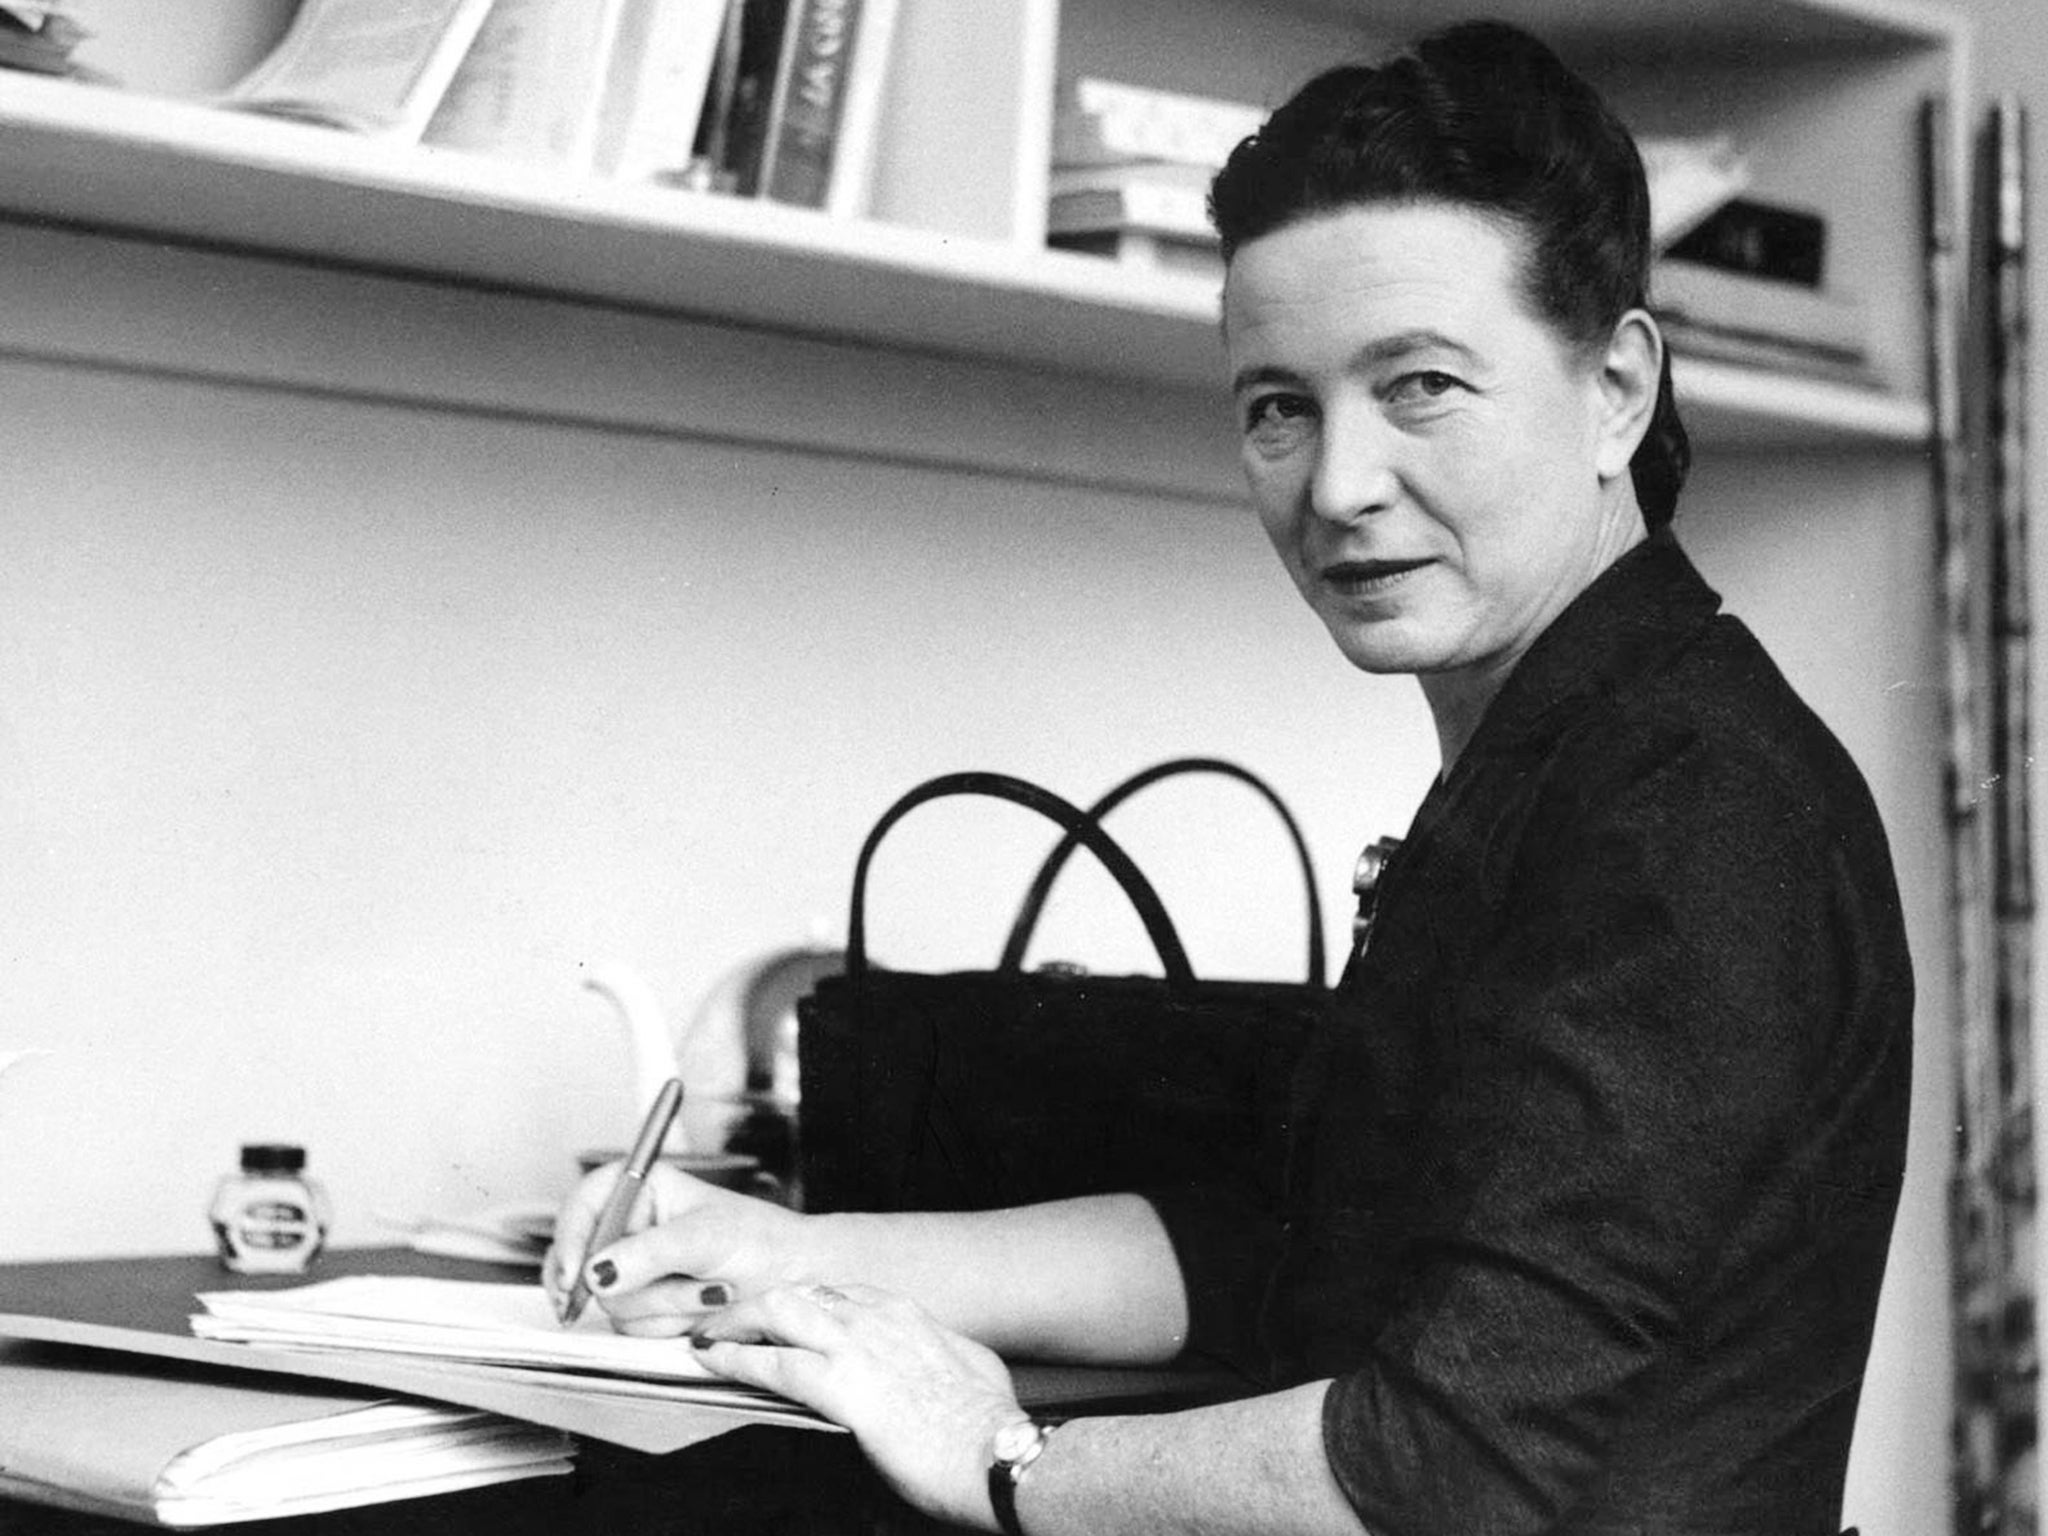 Writer Simone De Beauvoir was fired from her job as a high school teacher after having multiple affairs with her students